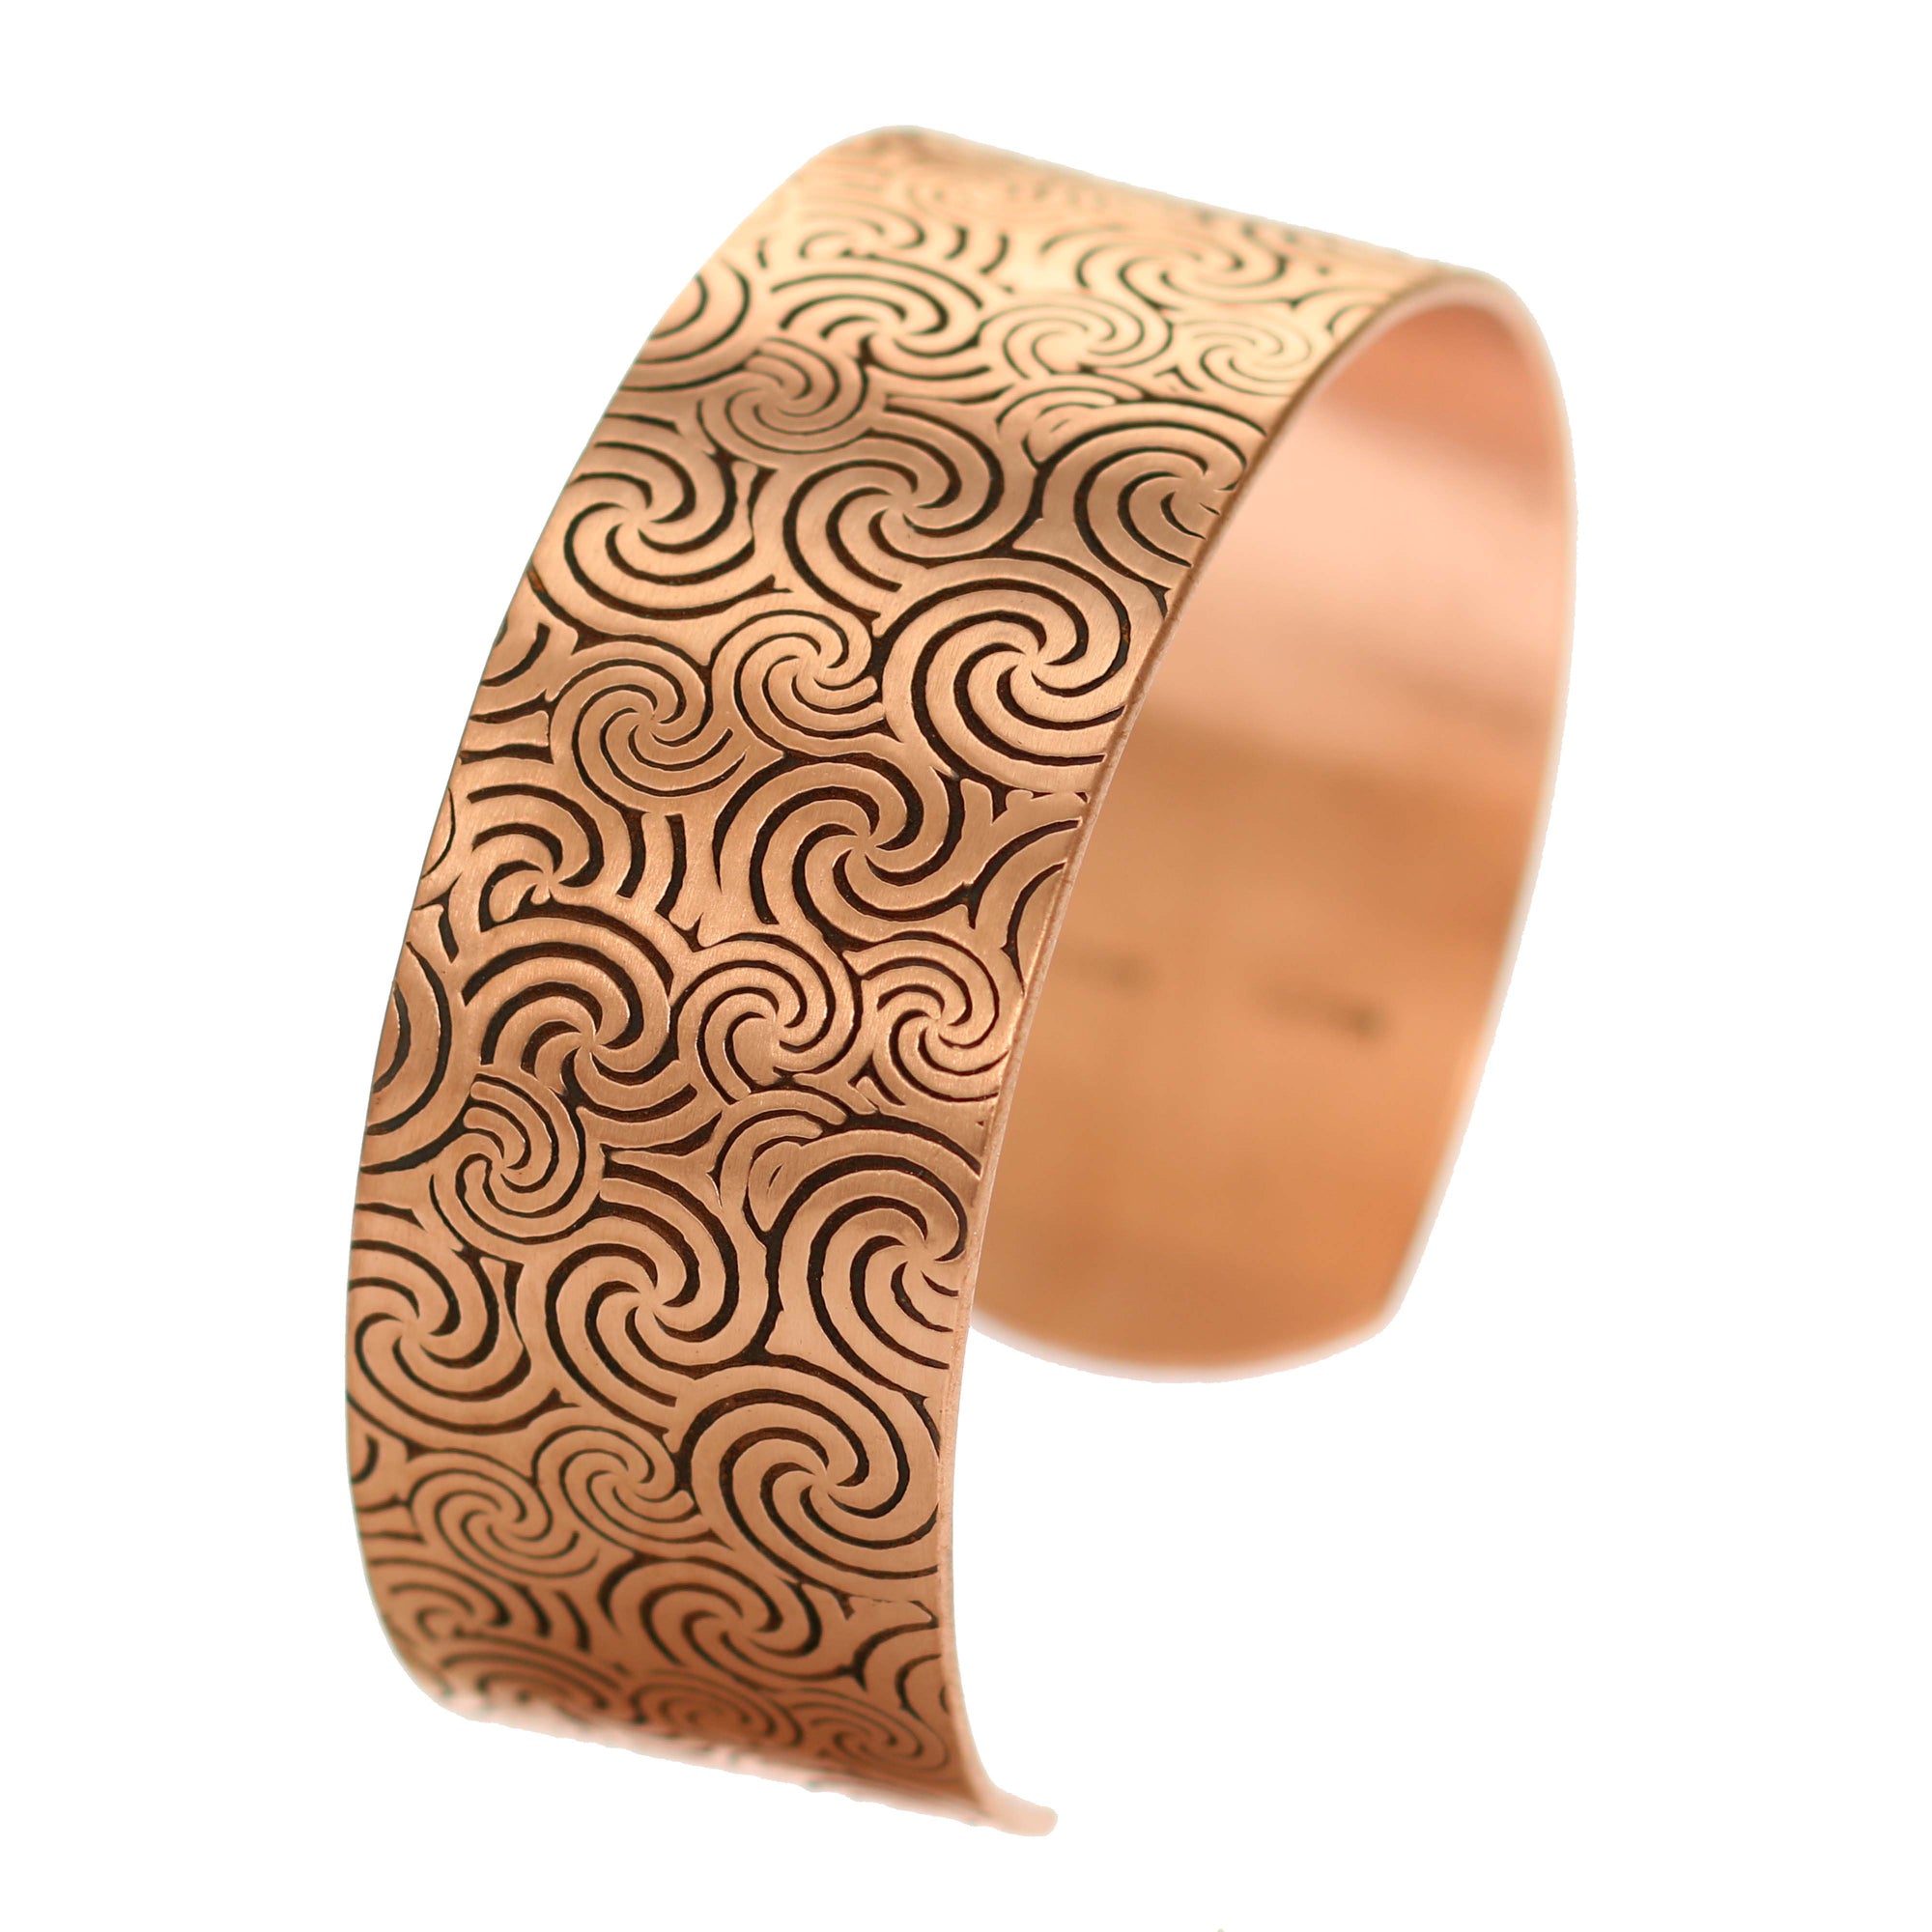  Solid Copper 1 Inch Wide Wave Embossed Cuff